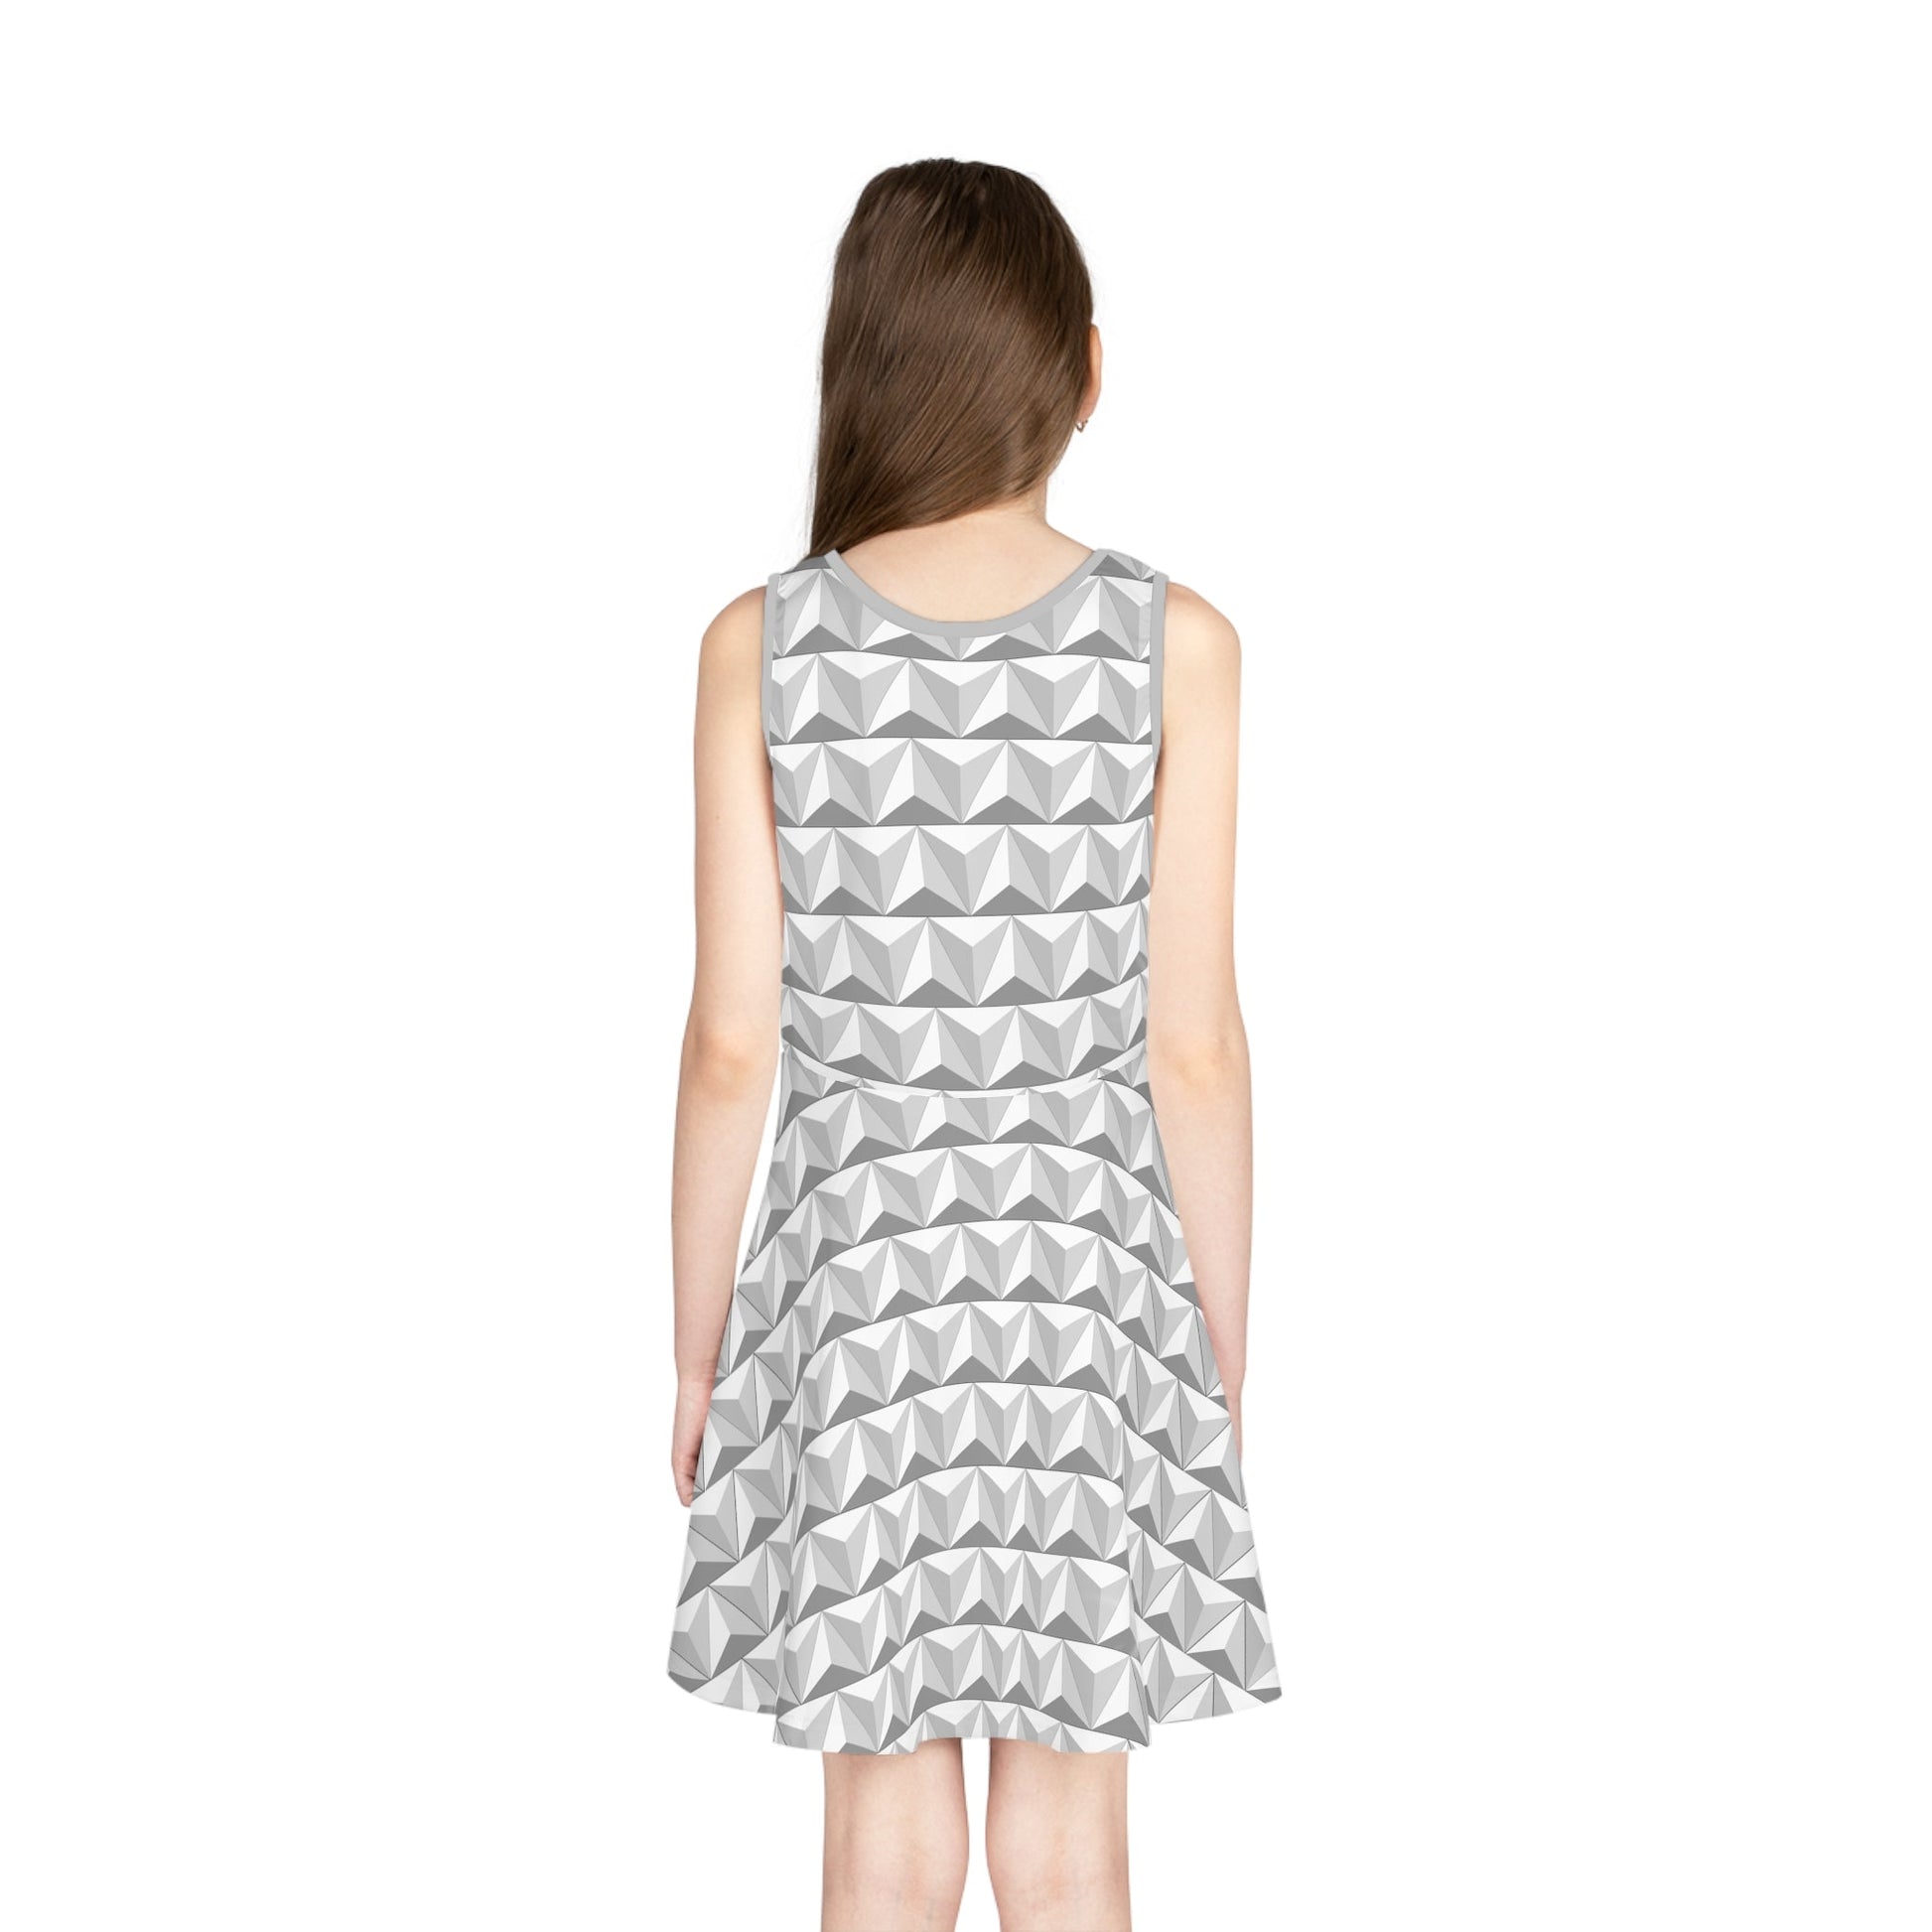 Geometric Dome Girls' Sleeveless Sundress All Over PrintAOPAOP Clothing#tag4##tag5##tag6#